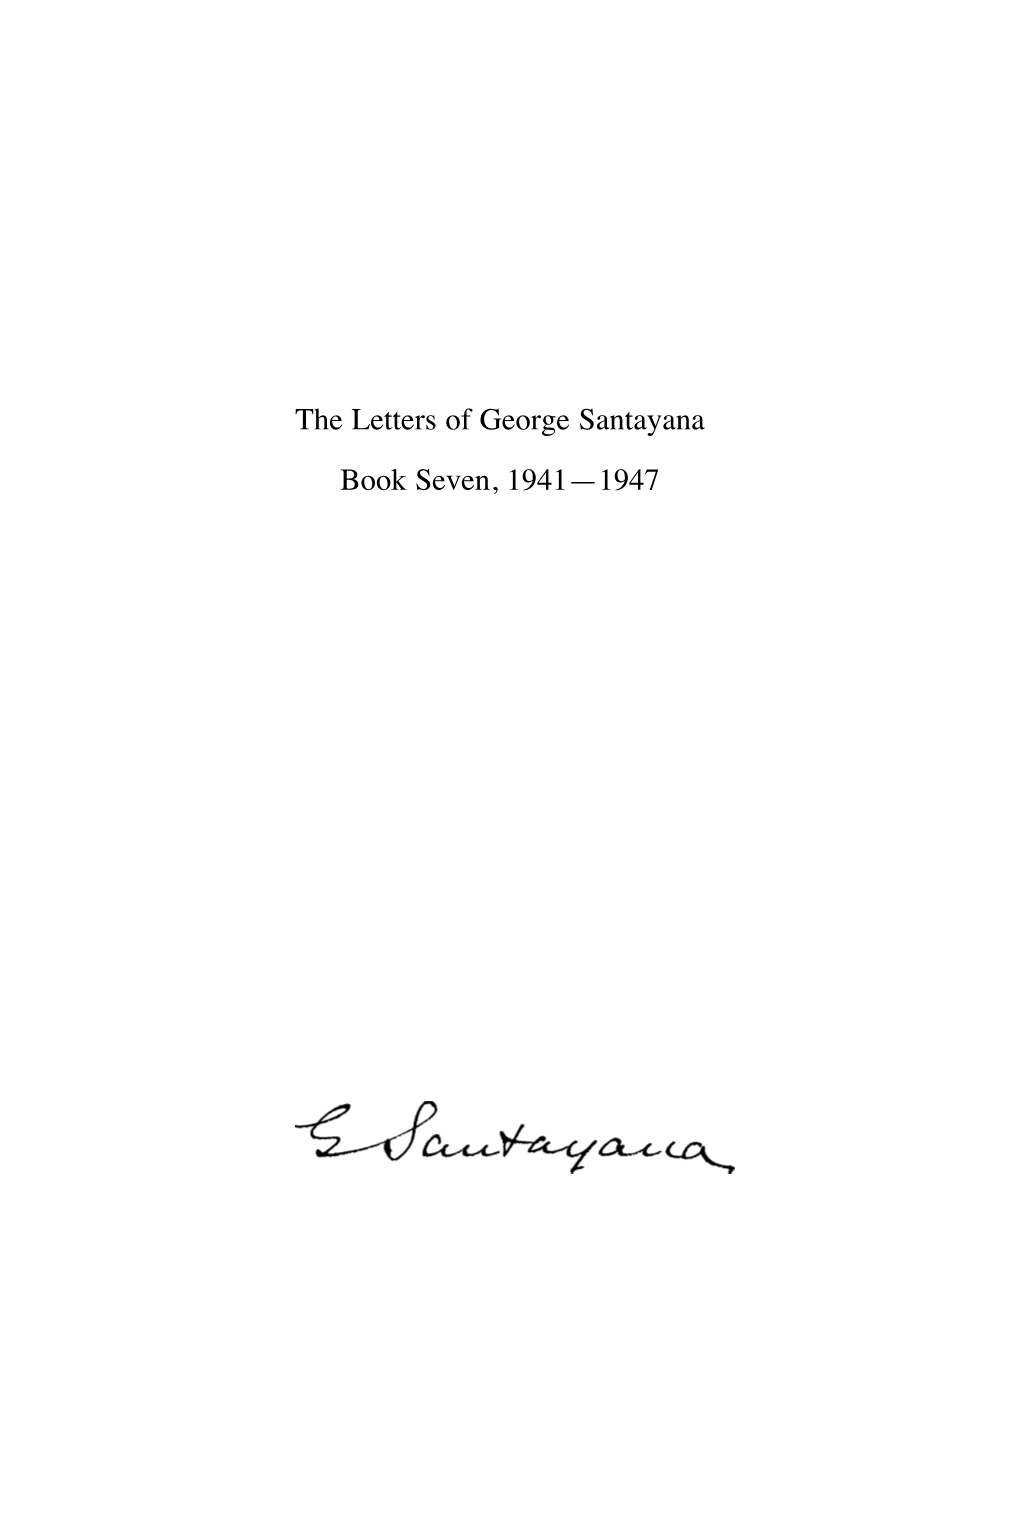 The Letters of George Santayana Book Seven, 1941—1947